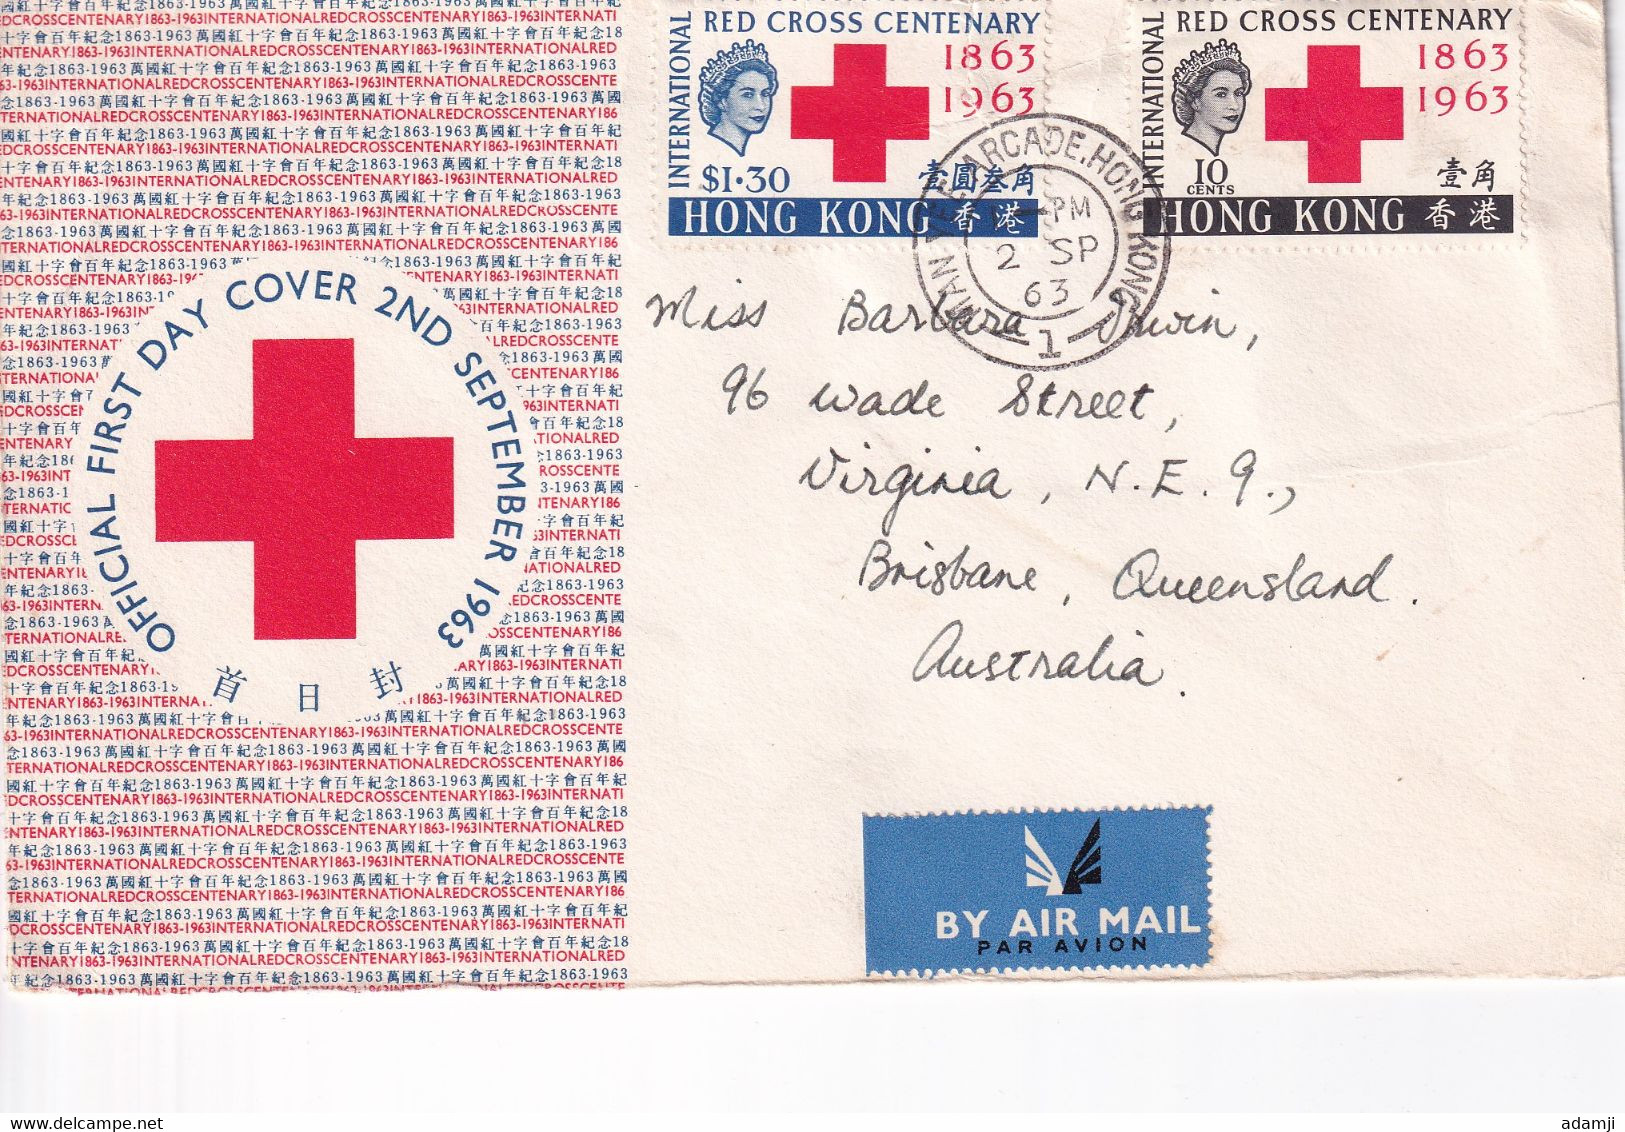 HONG KONG 1963 RED CROSS FDC COVER TO AUSTRALIA. - Covers & Documents